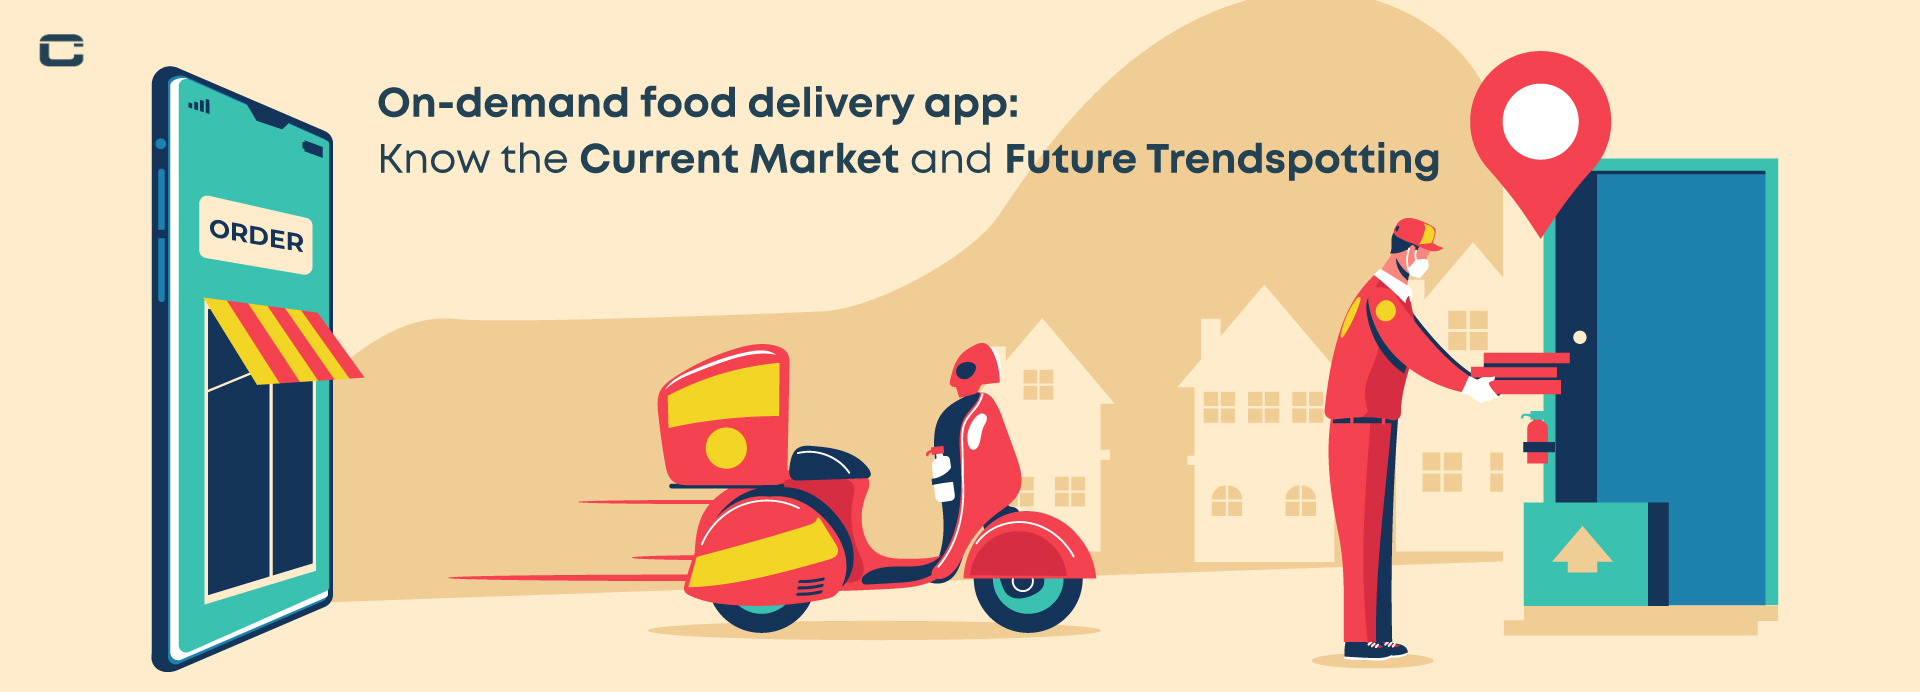 On-demand food delivery app: Know the Current Market and Future Trendspotting